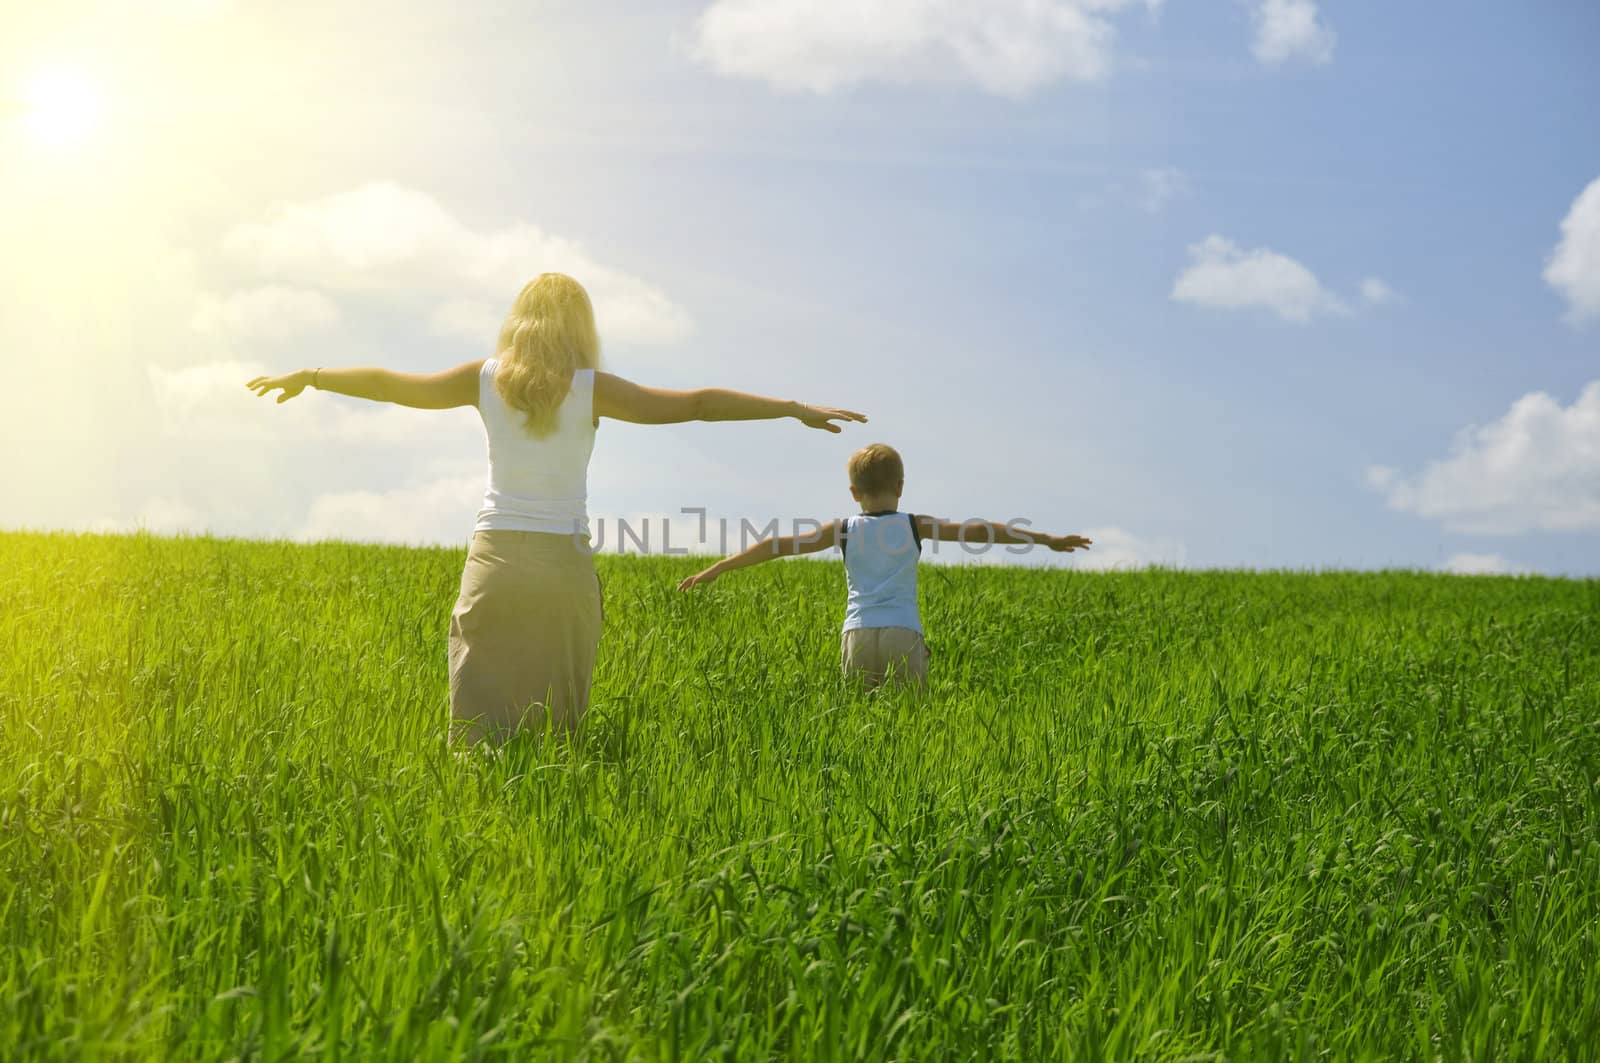 ma and son walk in field. agricultural nature landscape with blue cloud sky and green grass